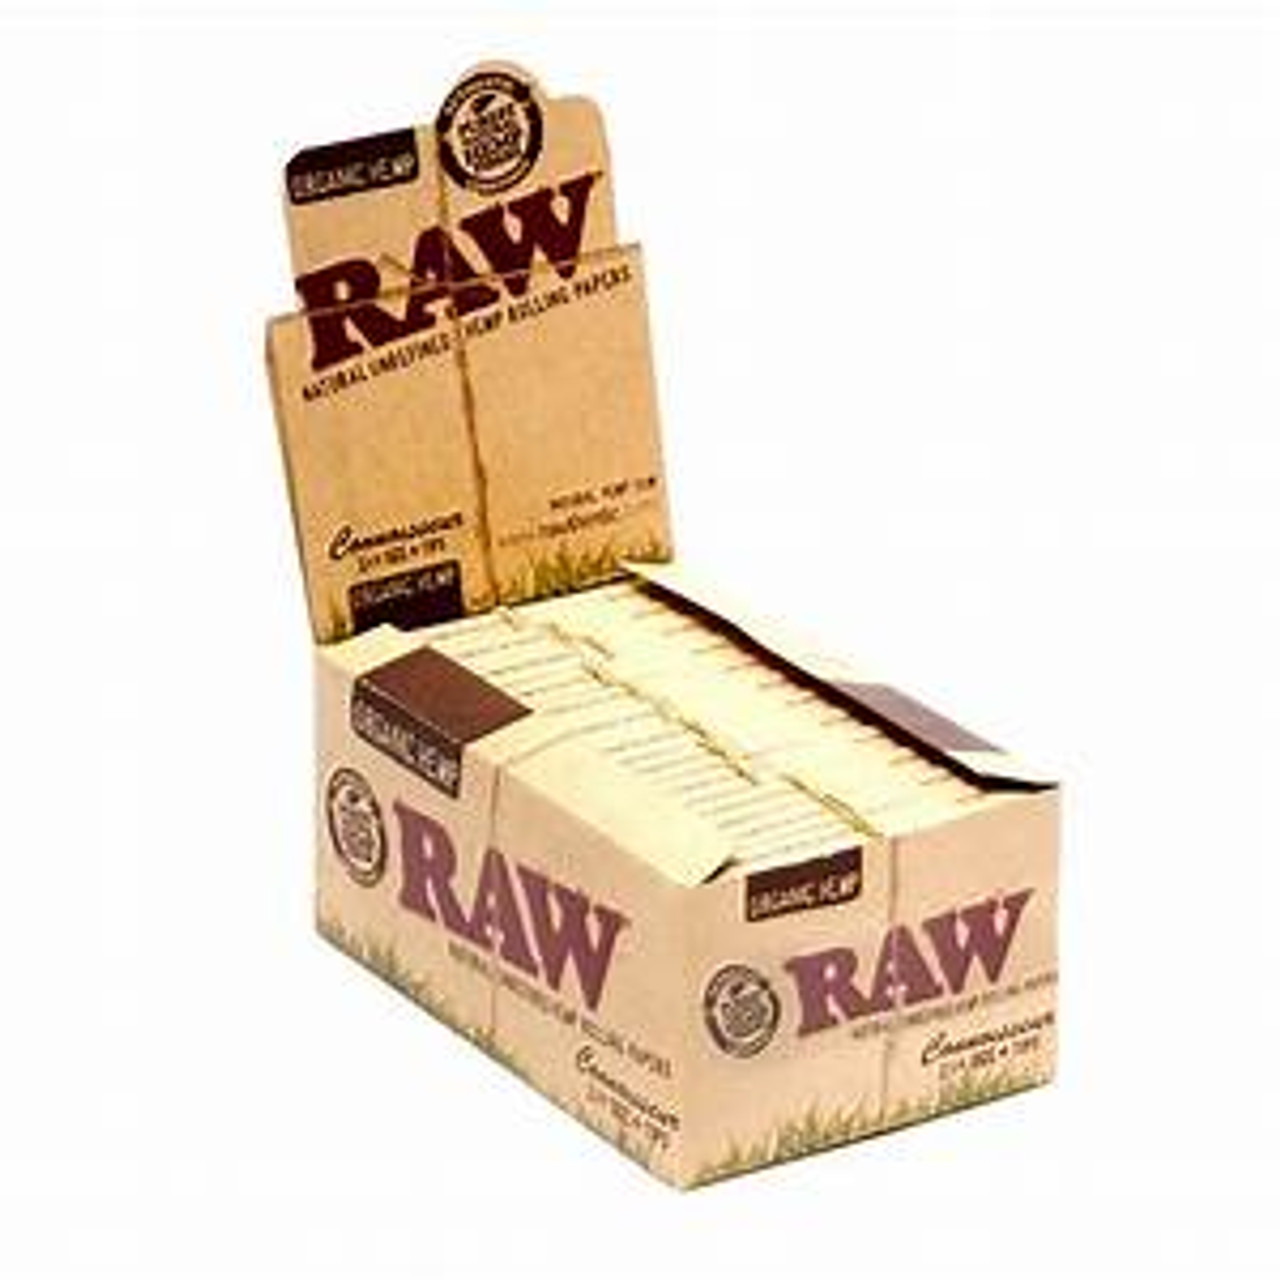 RAW Connoisseur Classic 1 1/4 inch 24 Booklets